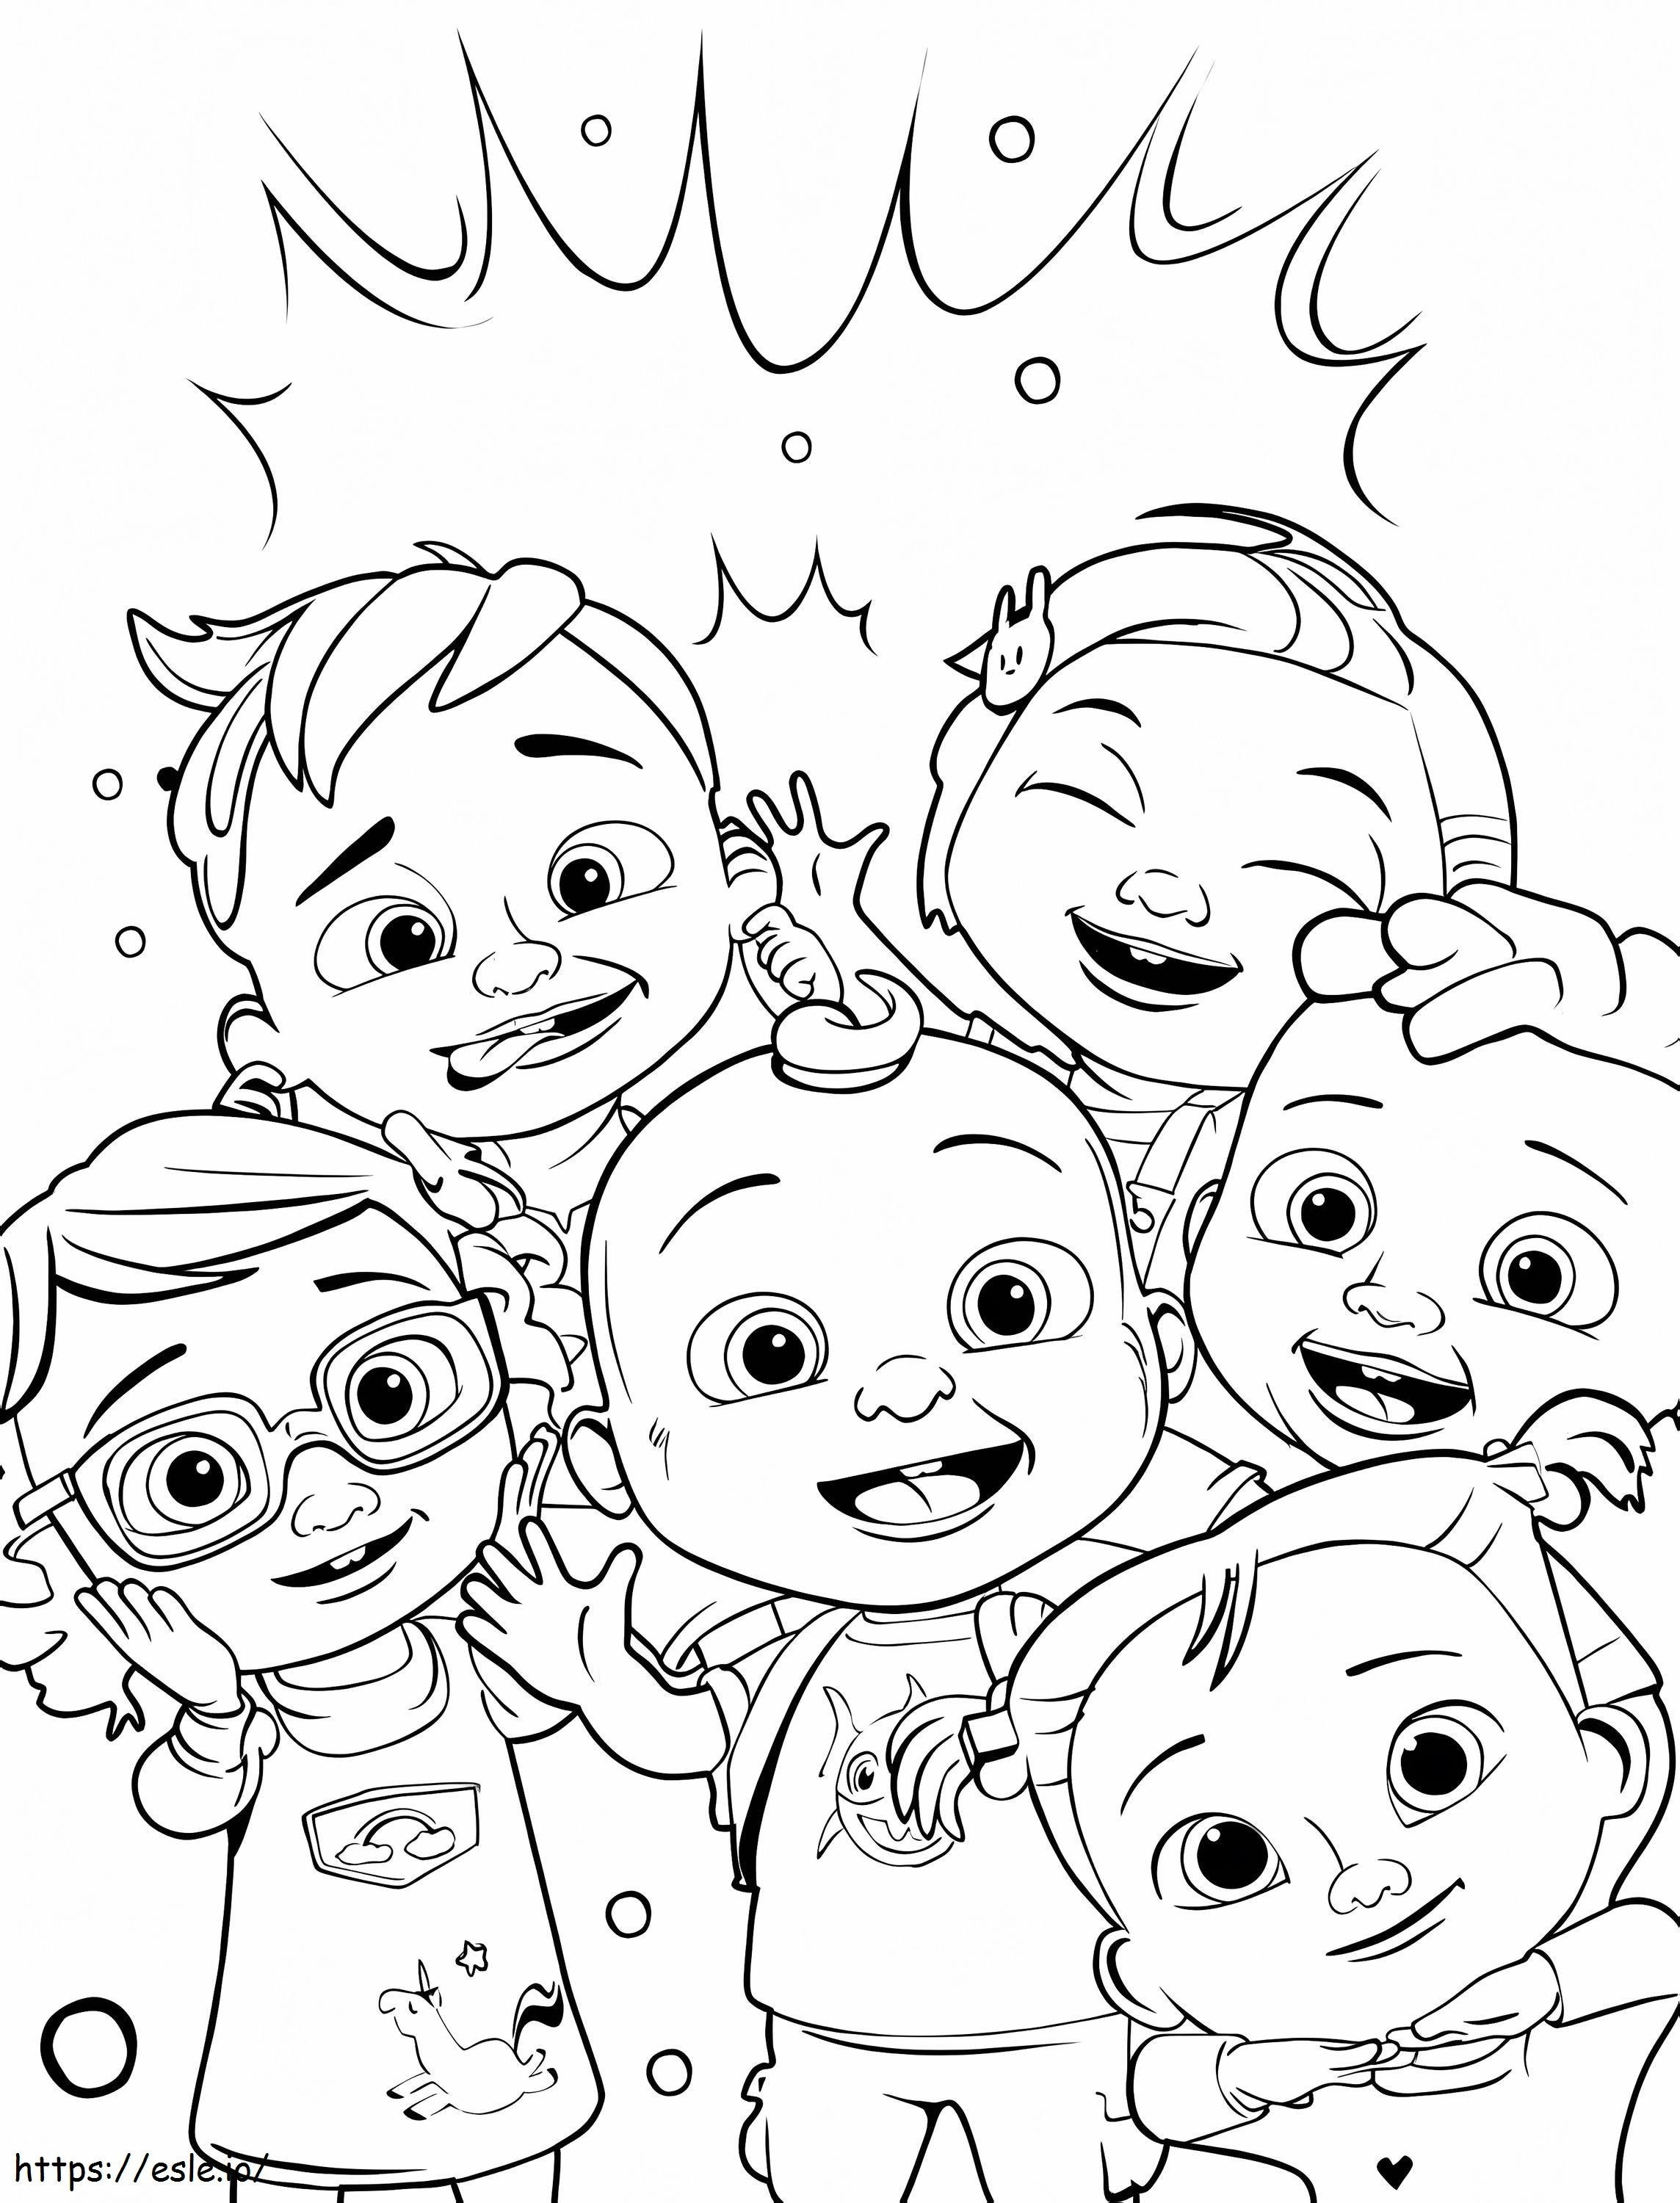 Johnny And Friends coloring page